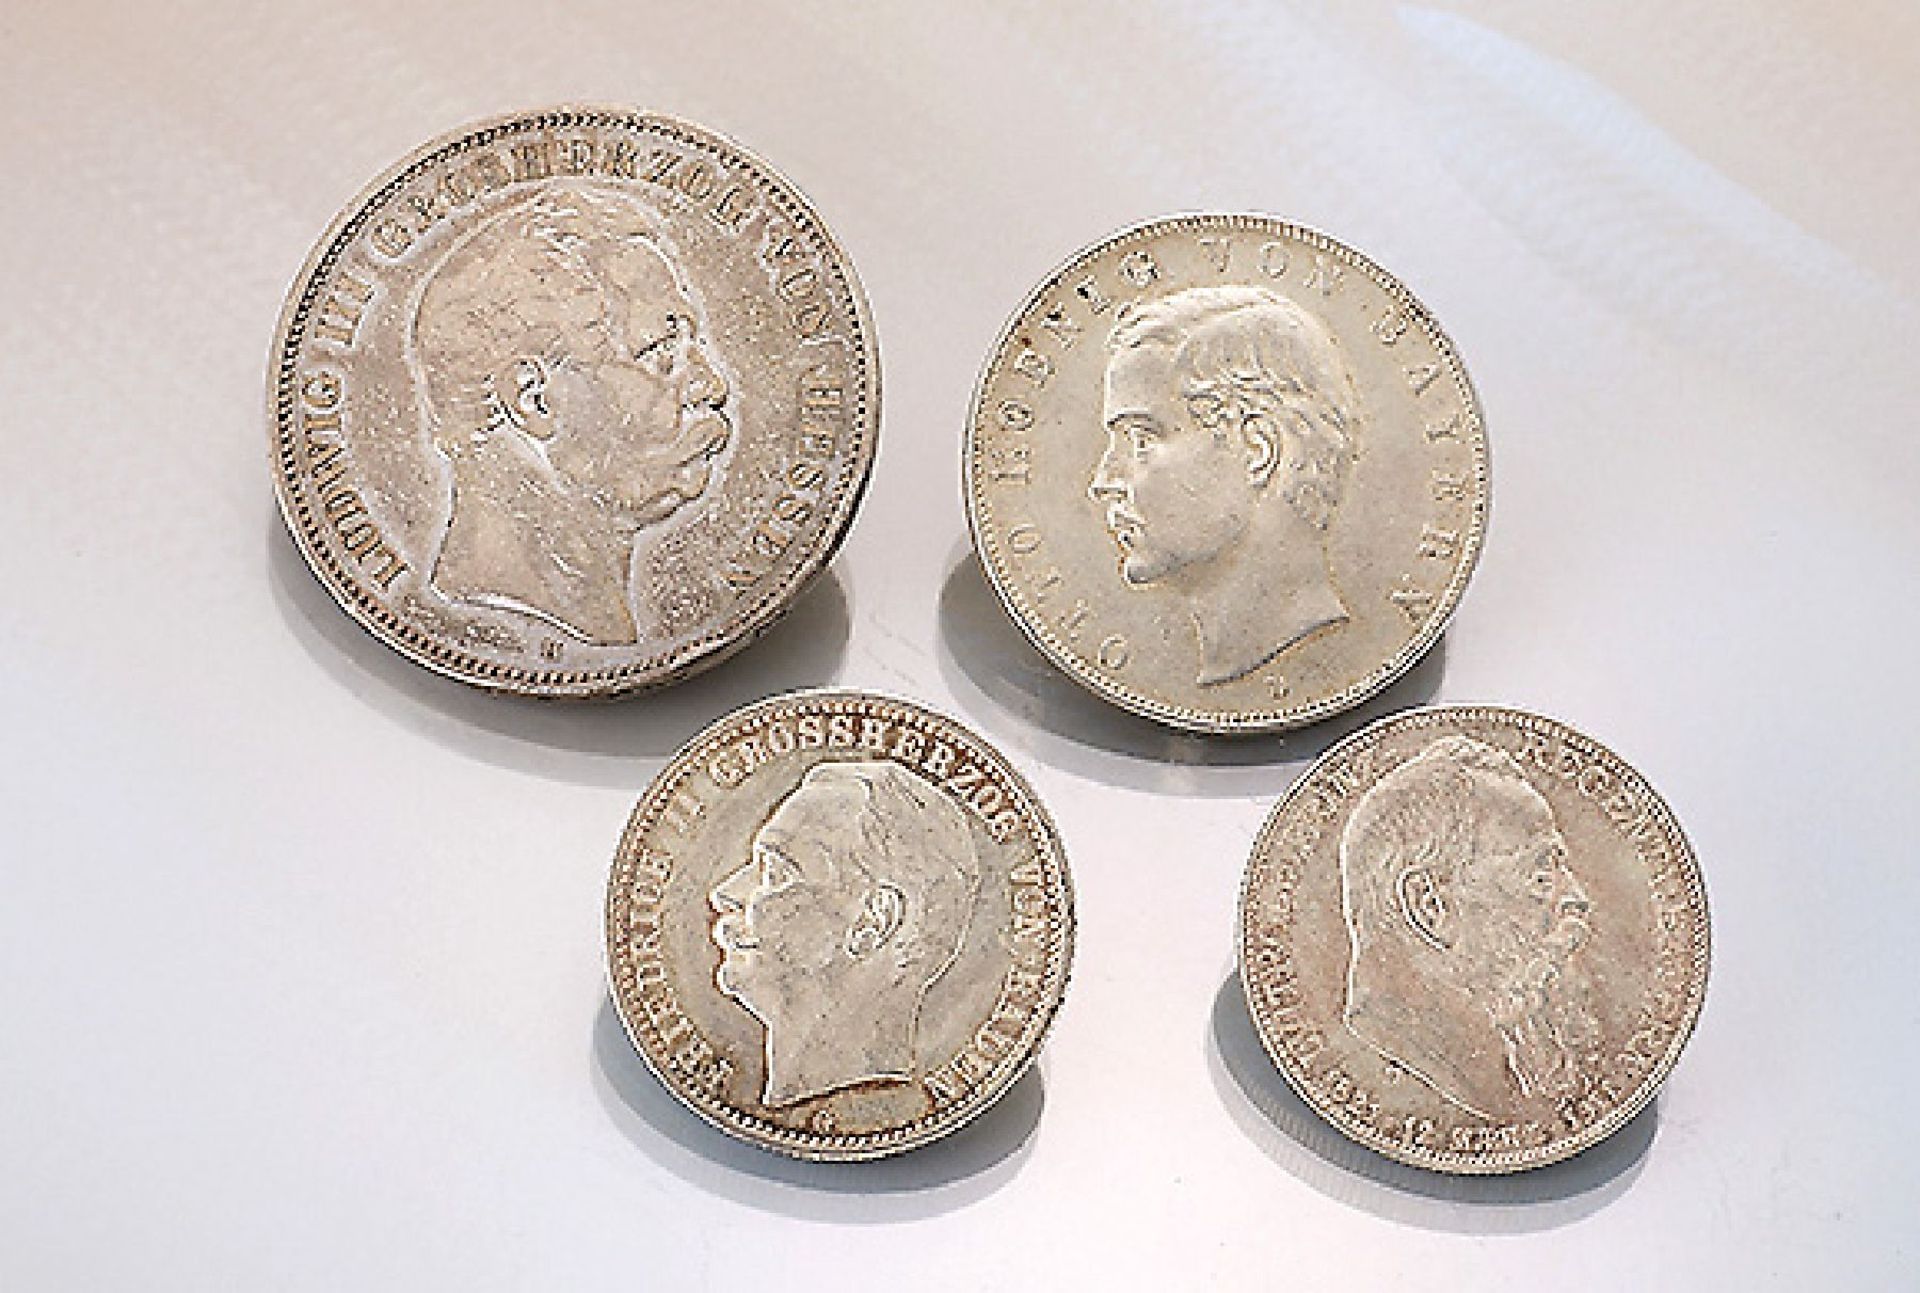 Lot 12 silver coins, German Reich , comprised of: 1 x 5 Mark, 1875, Ludwig III. grand duke of Hesse,